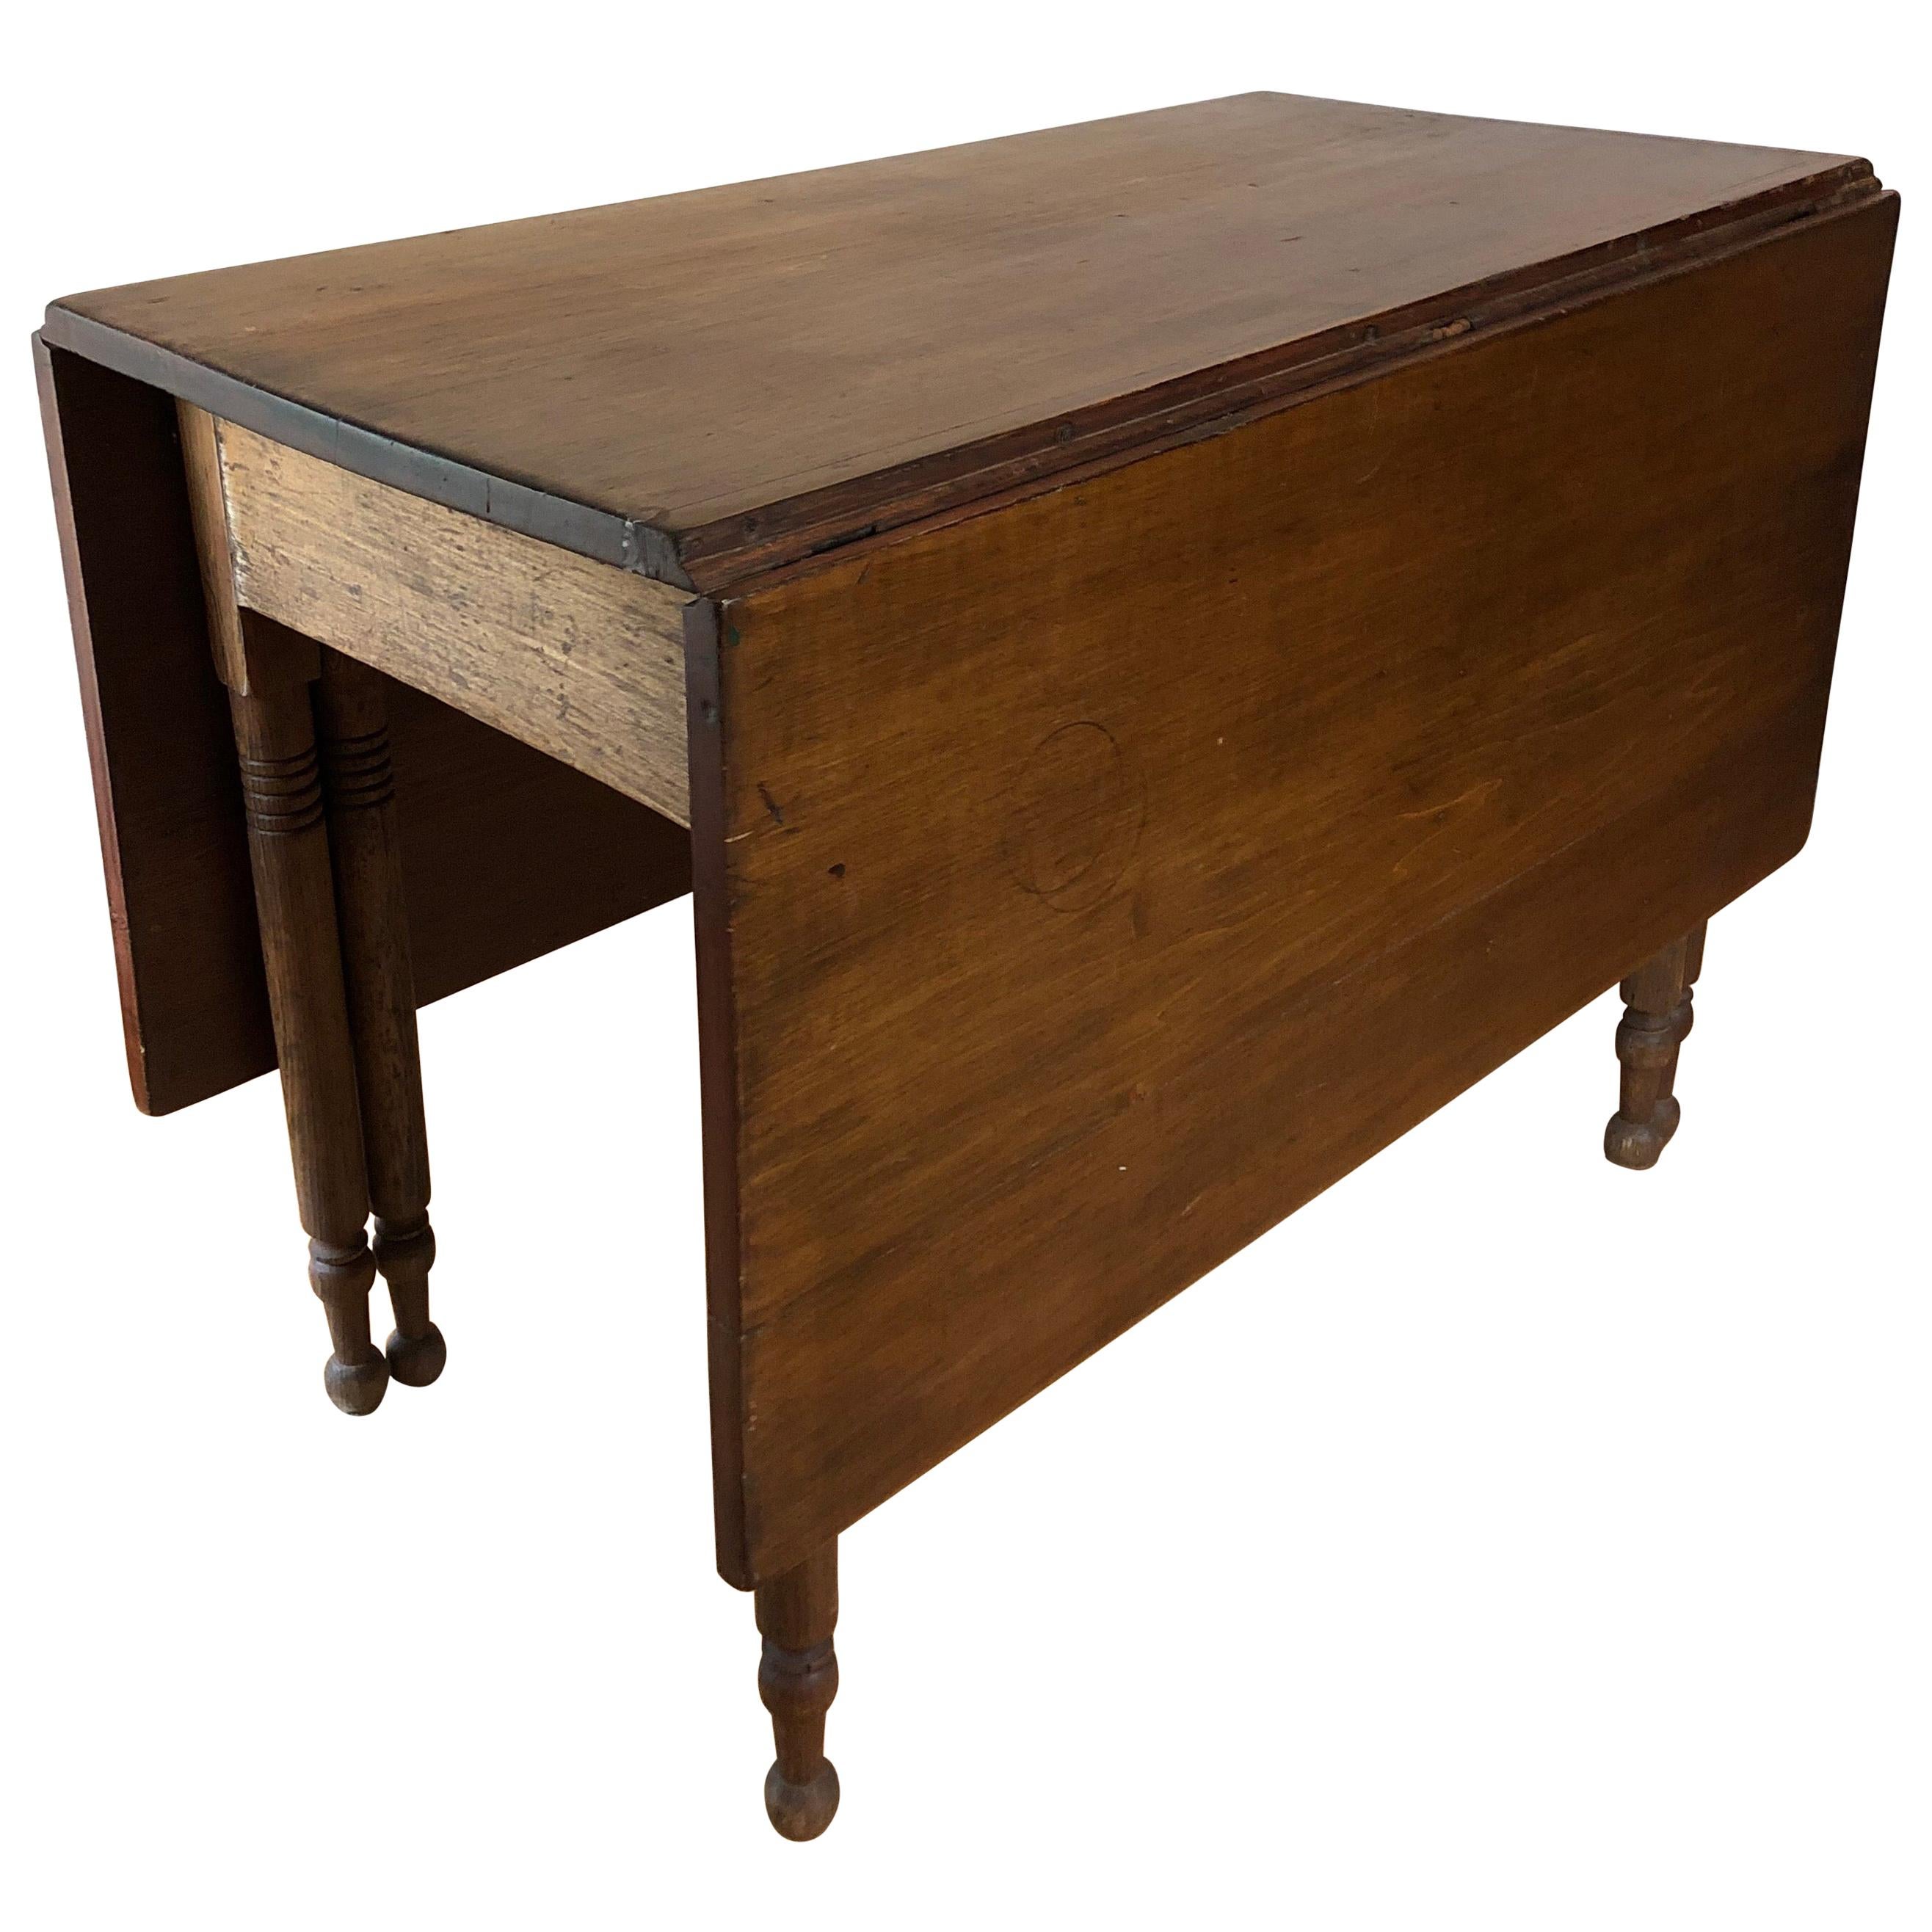 Country Federal Style Drop Leaf Table